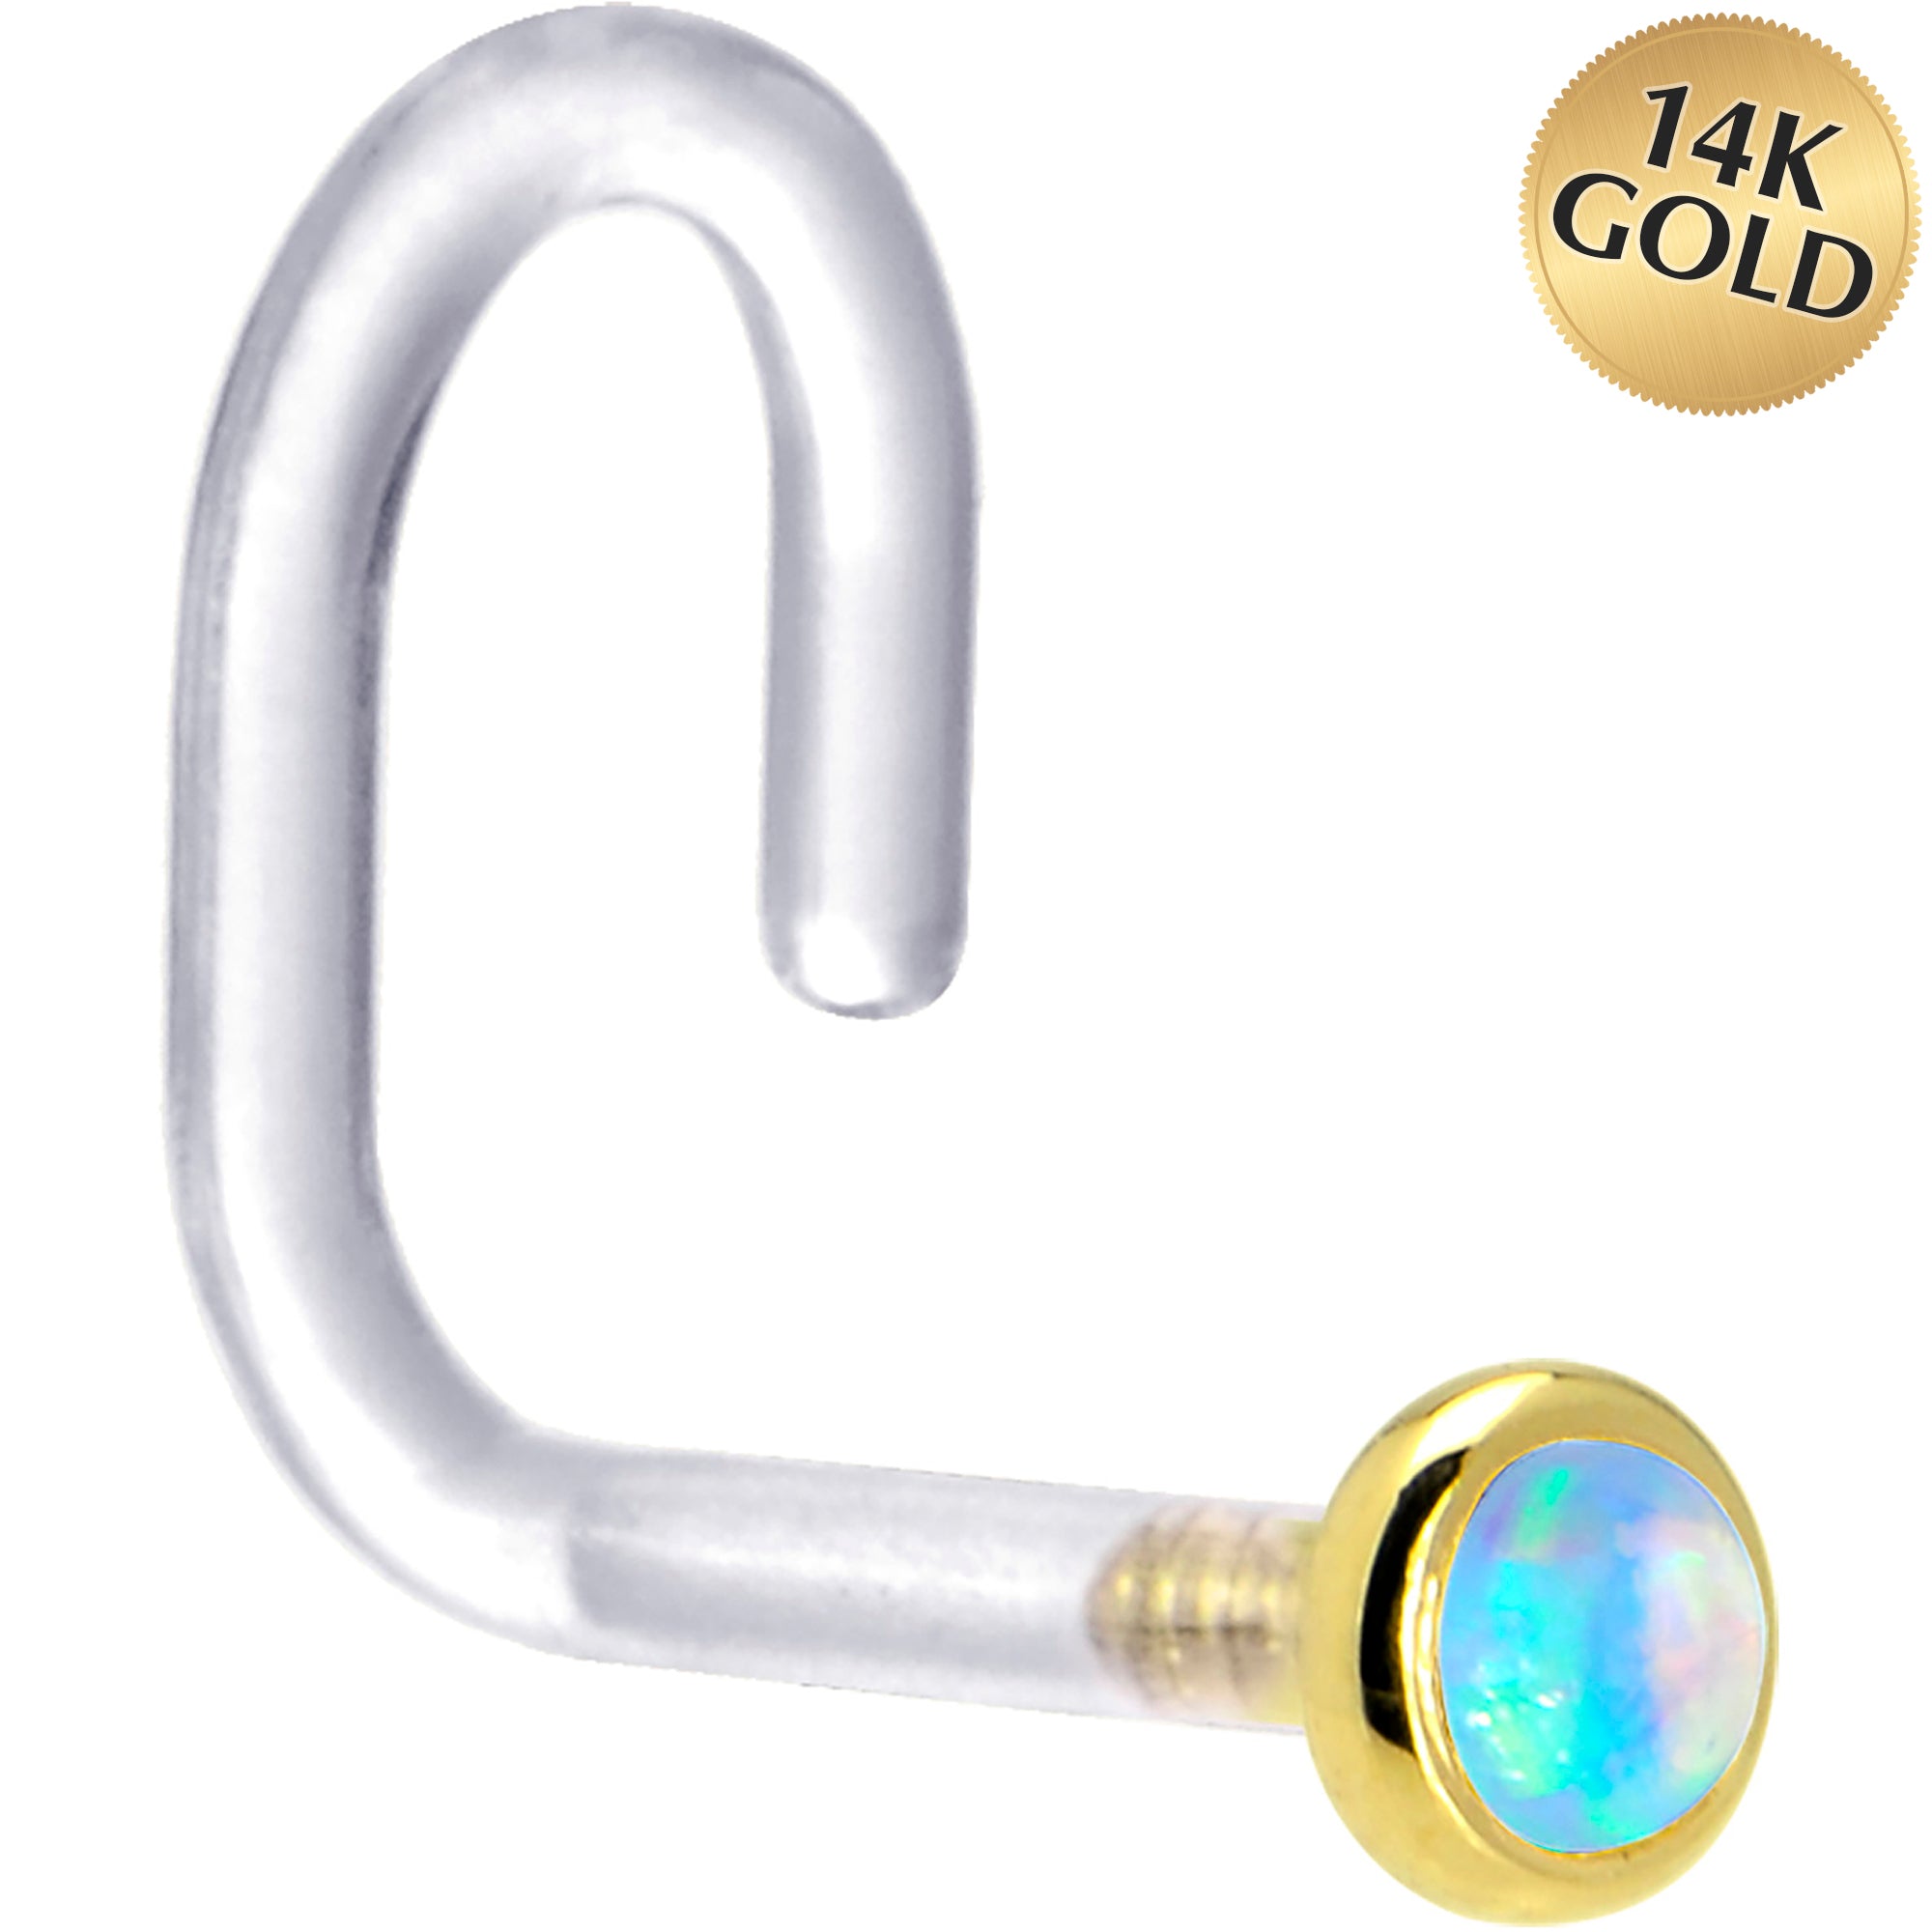 18 Gauge 1/4 Yellow Gold 2mm Light Blue Synthetic Opal Bioplast Nose Ring